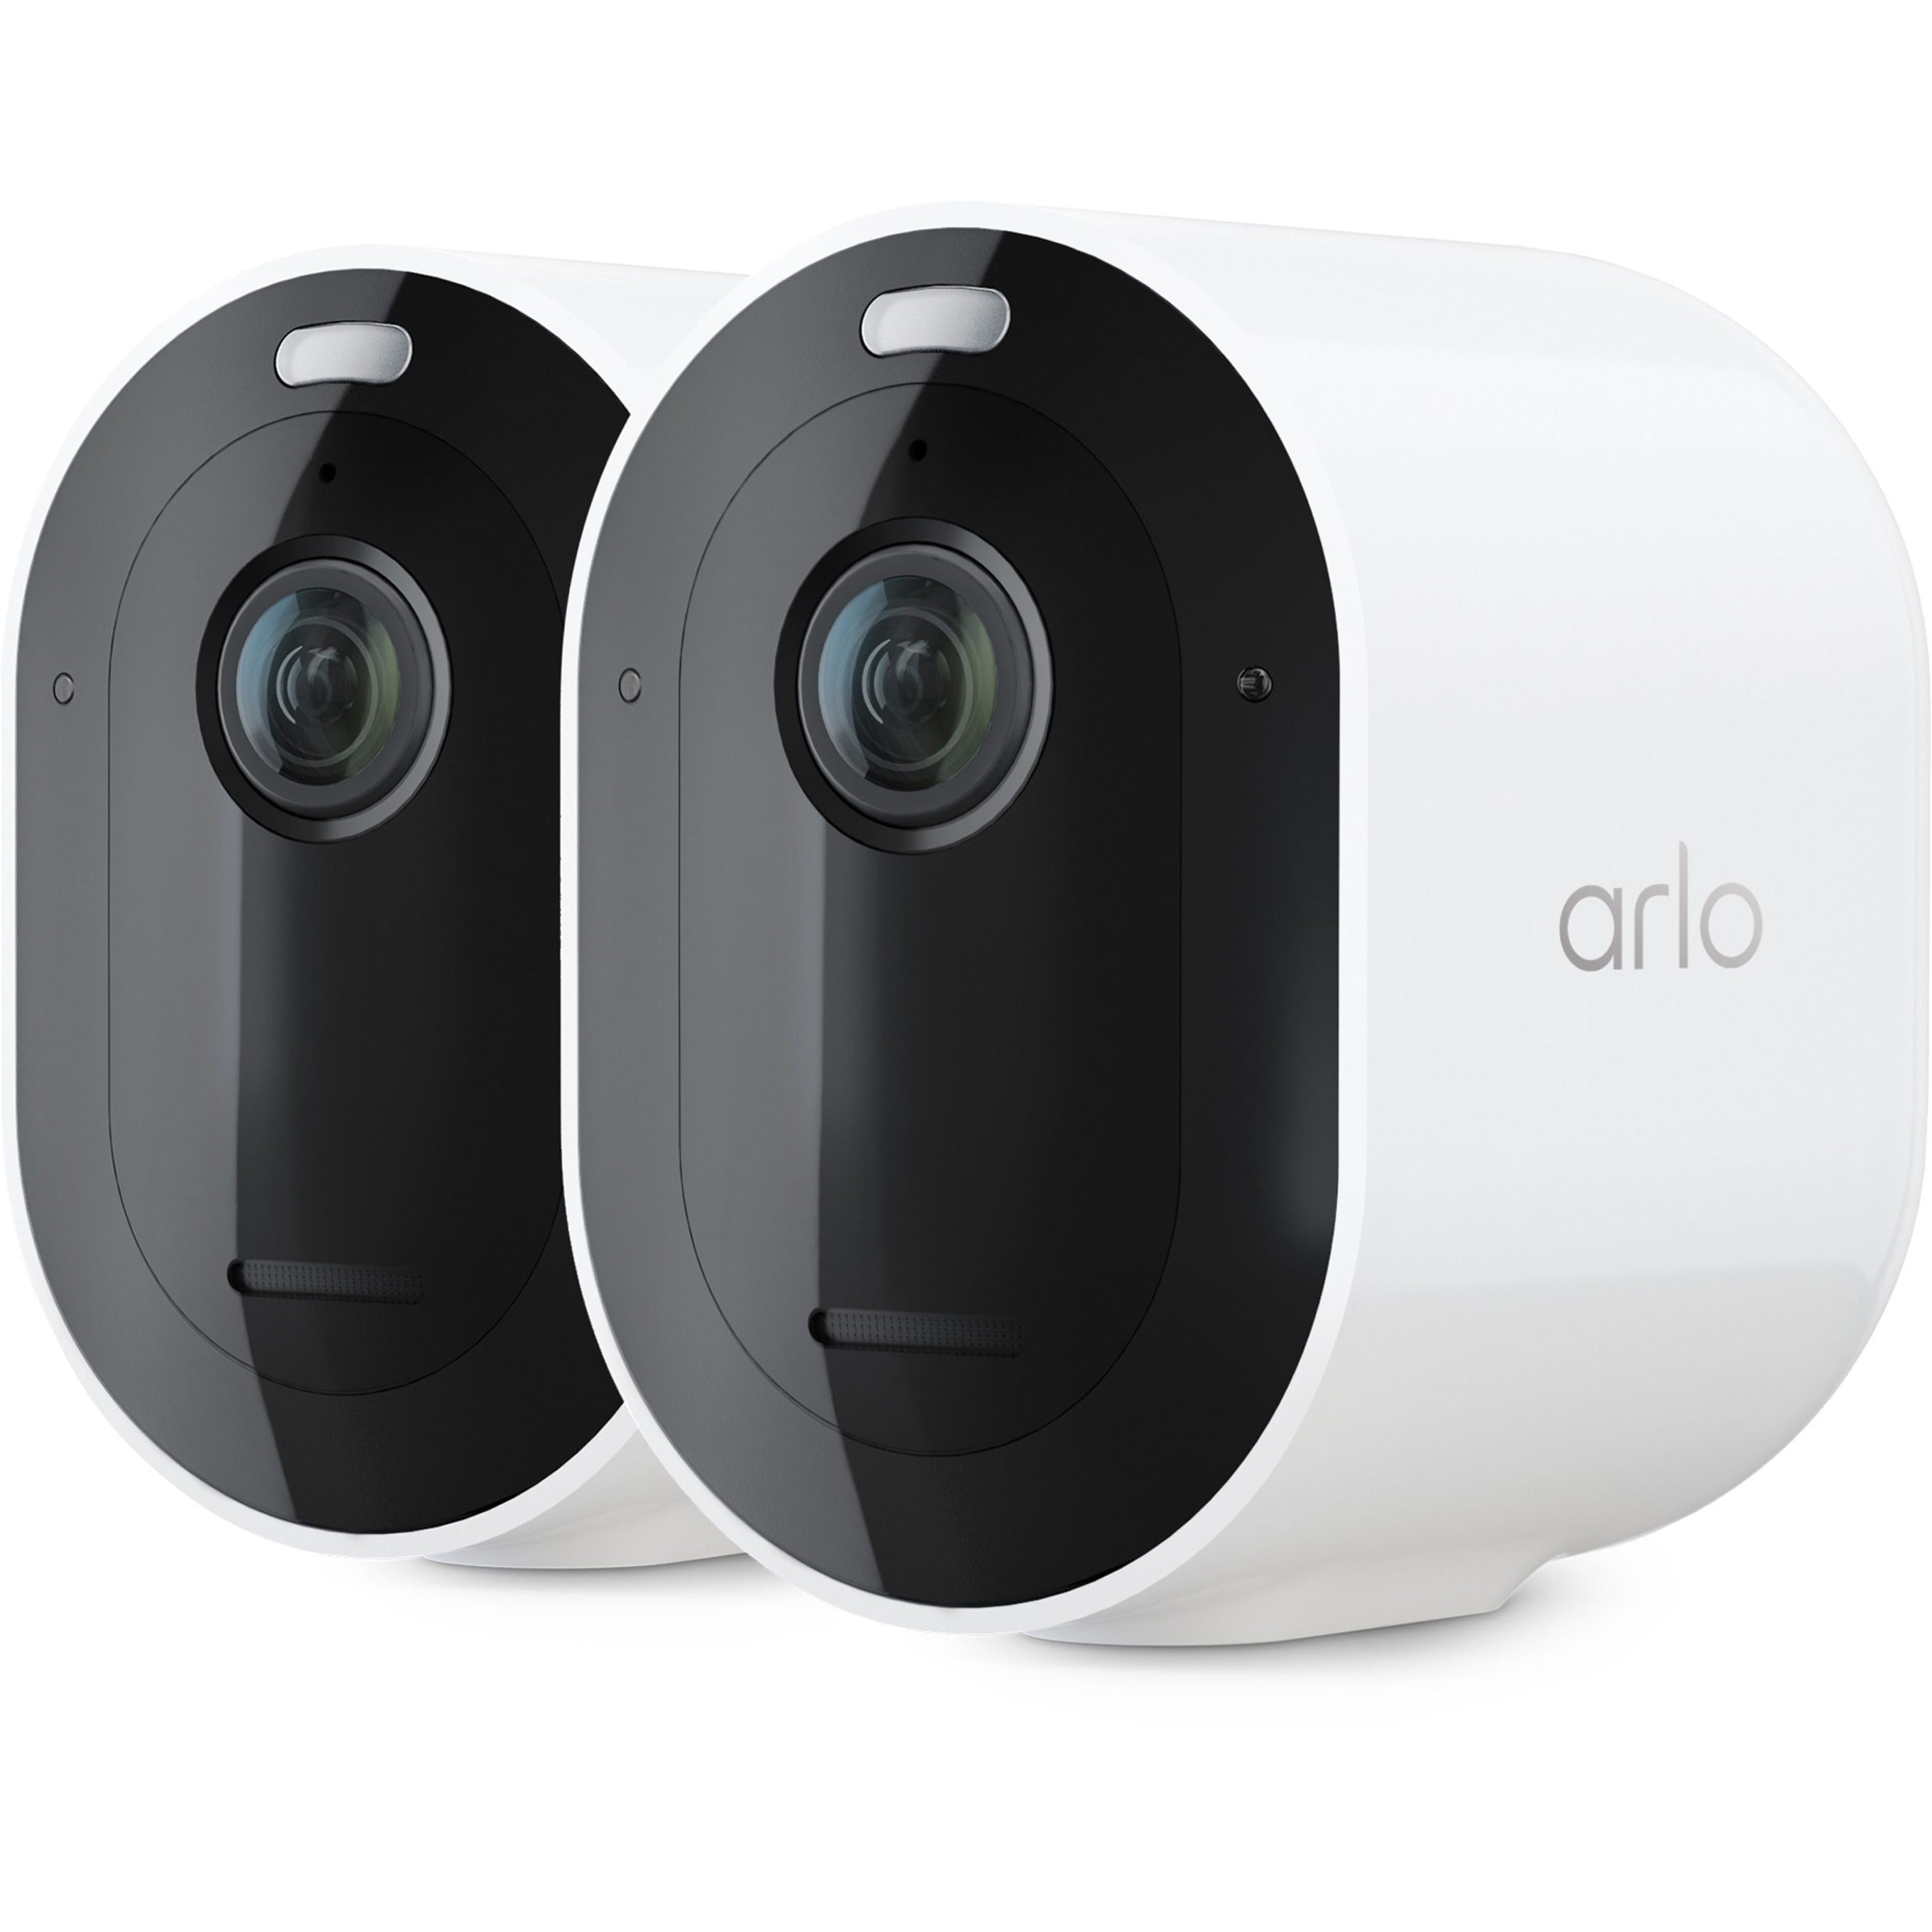 Arlo VMC4250P-100NAS Pro 4 Spotlight Camera 2-Pack, White - Indoor/Outdoor 2K Wire-Free Security Camera with Color Night Vision